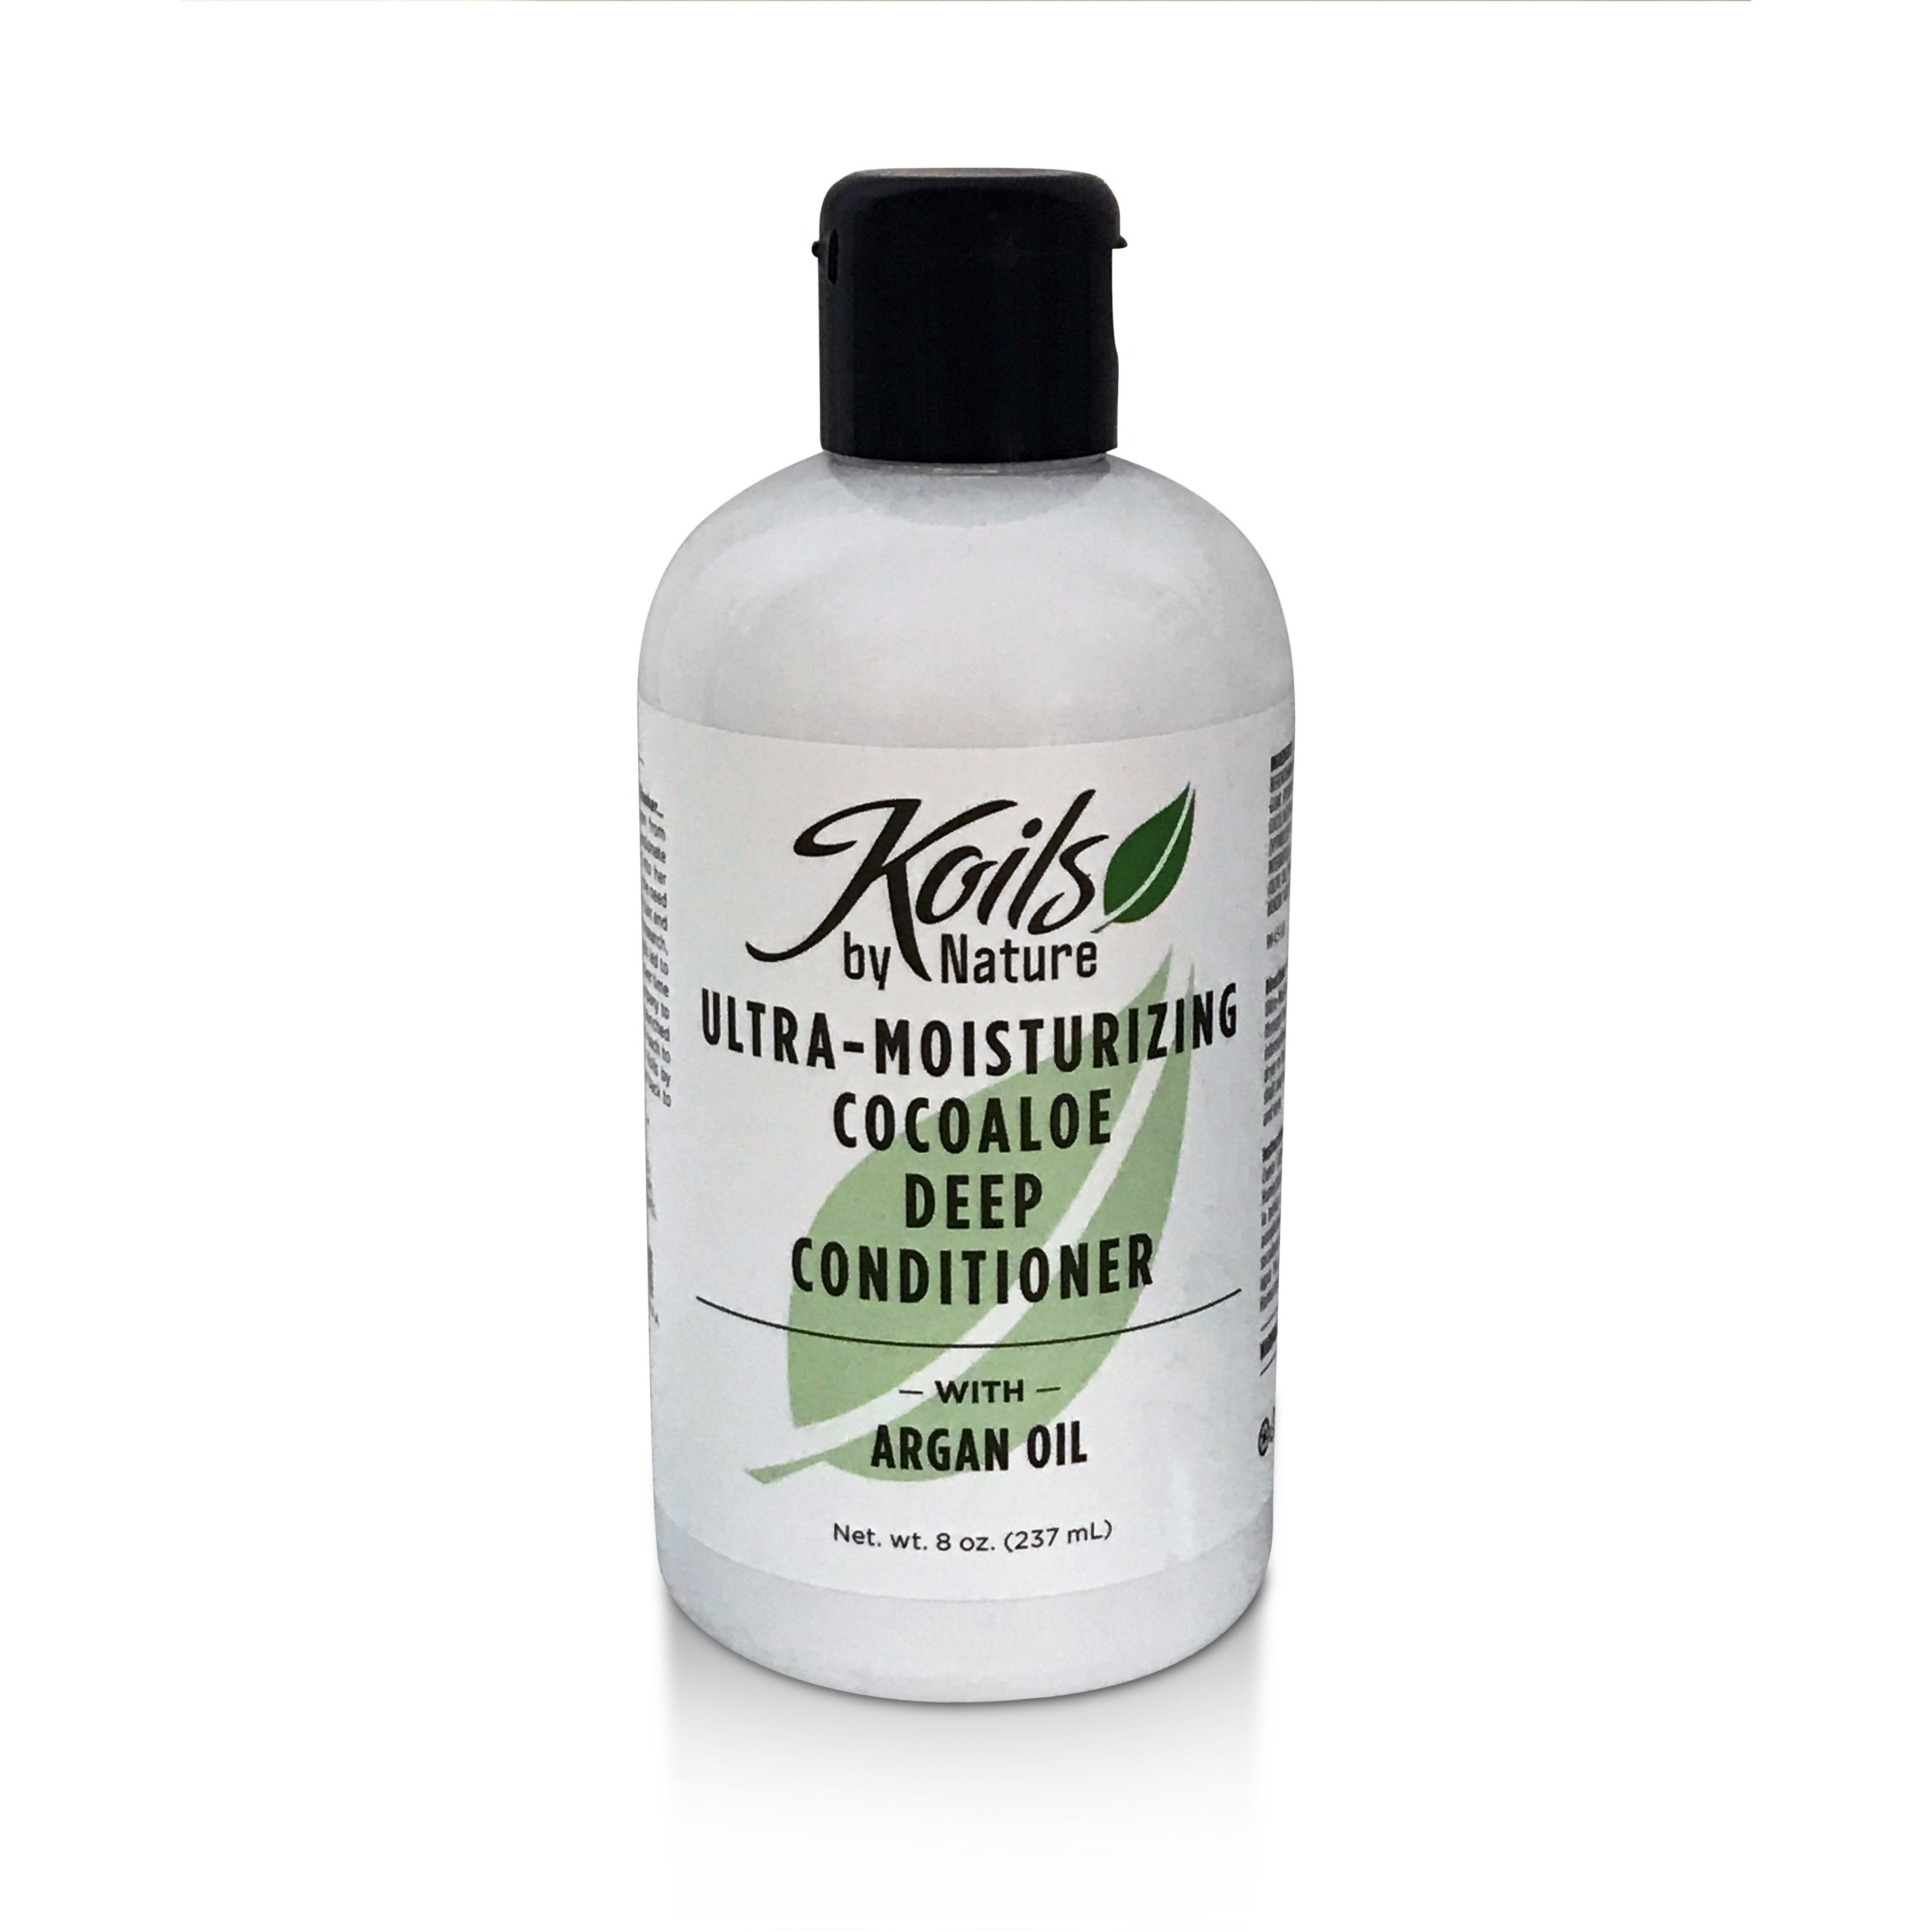 Koils by Nature Ultra-Moisturizing Deep Conditioner 8oz - 4th Ave Market